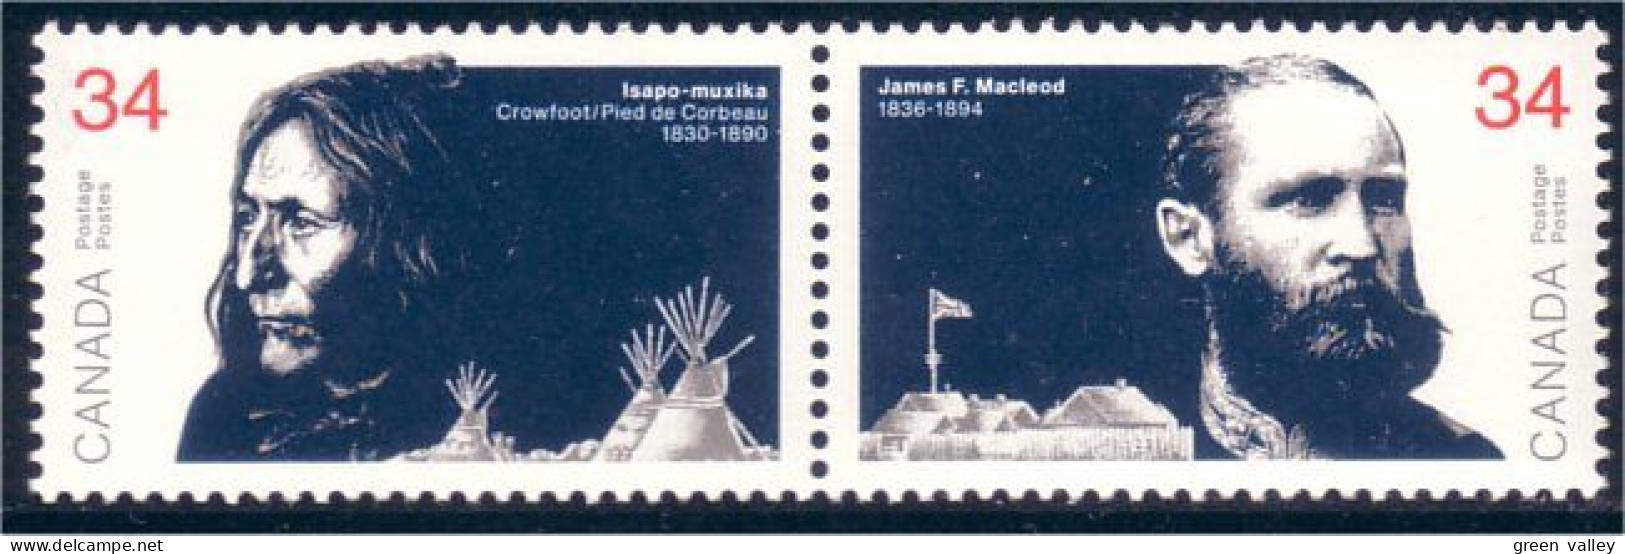 Canada Chief Crowfoot James Macleod Se-tenant MNH ** Neuf SC (C11-09ab) - American Indians